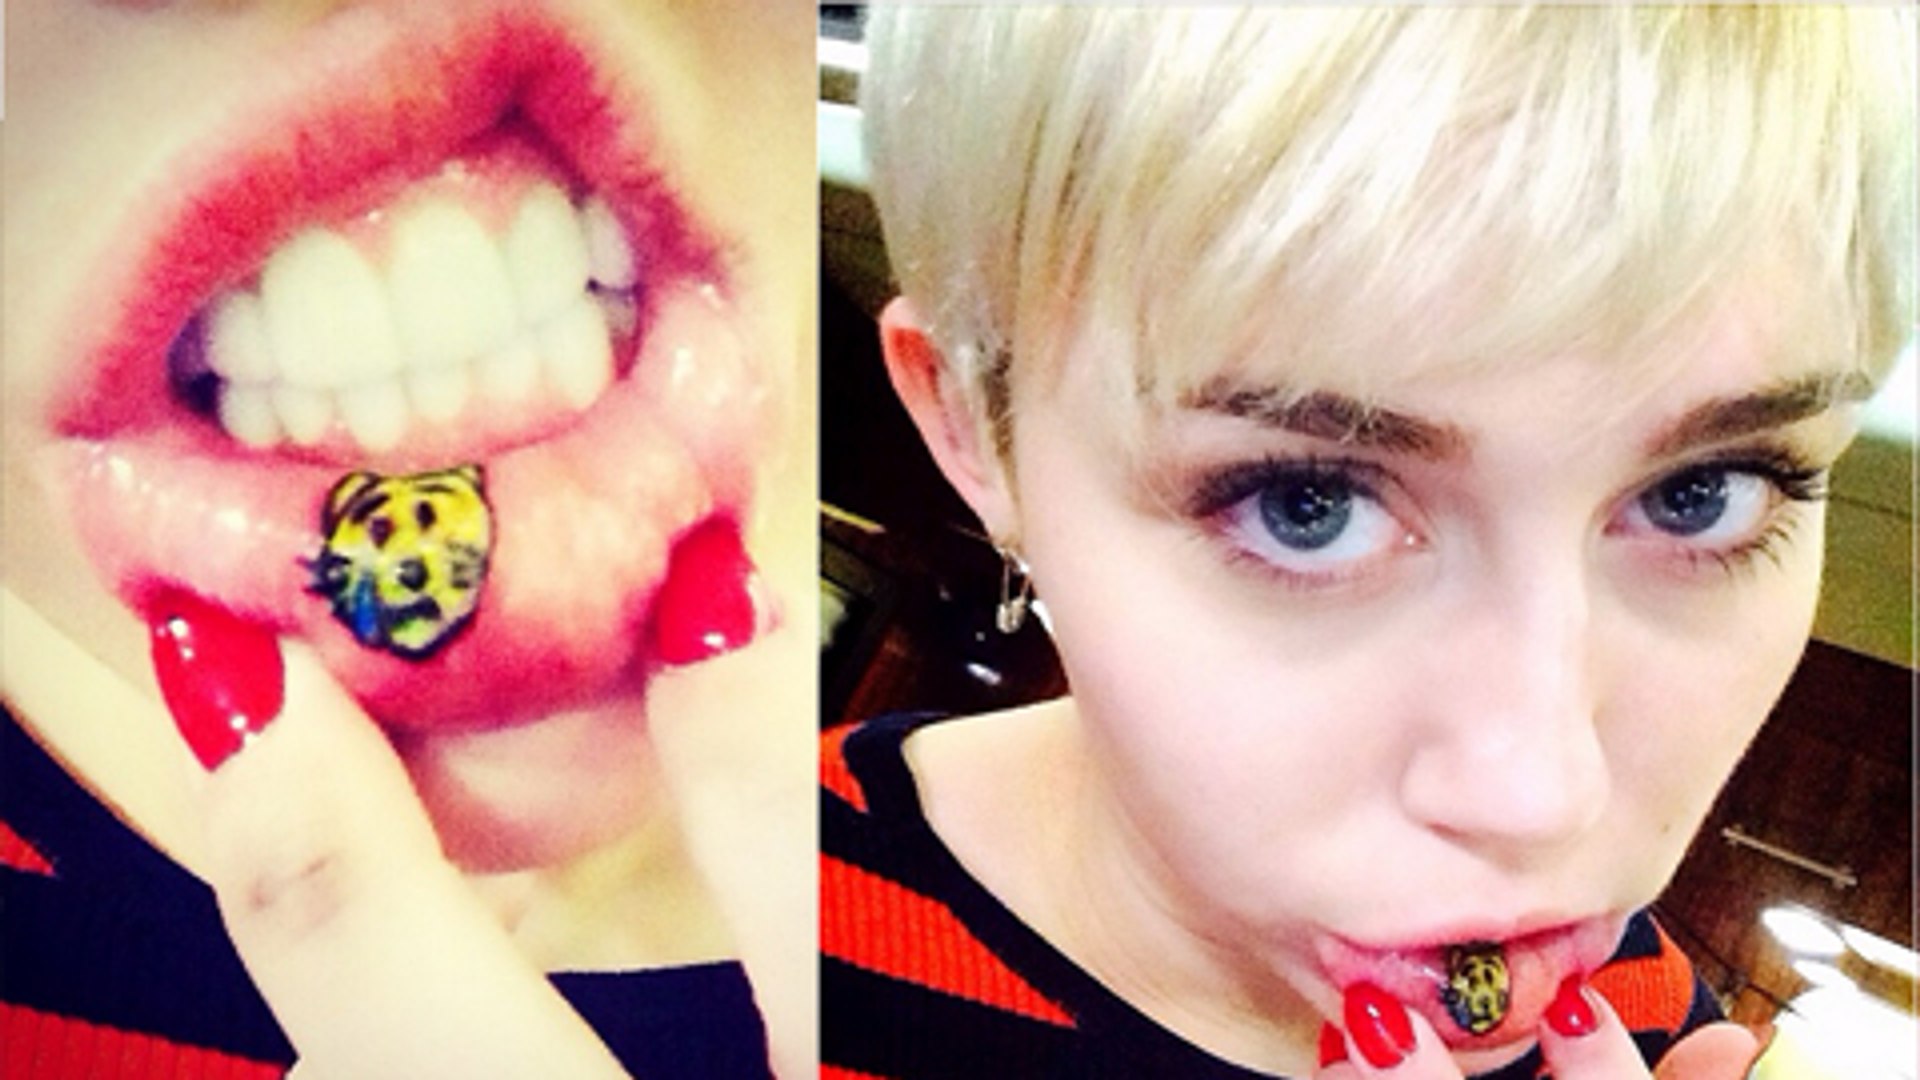 PAINFUL! Miley Cyrus Lip Tattoo - Hot or Not